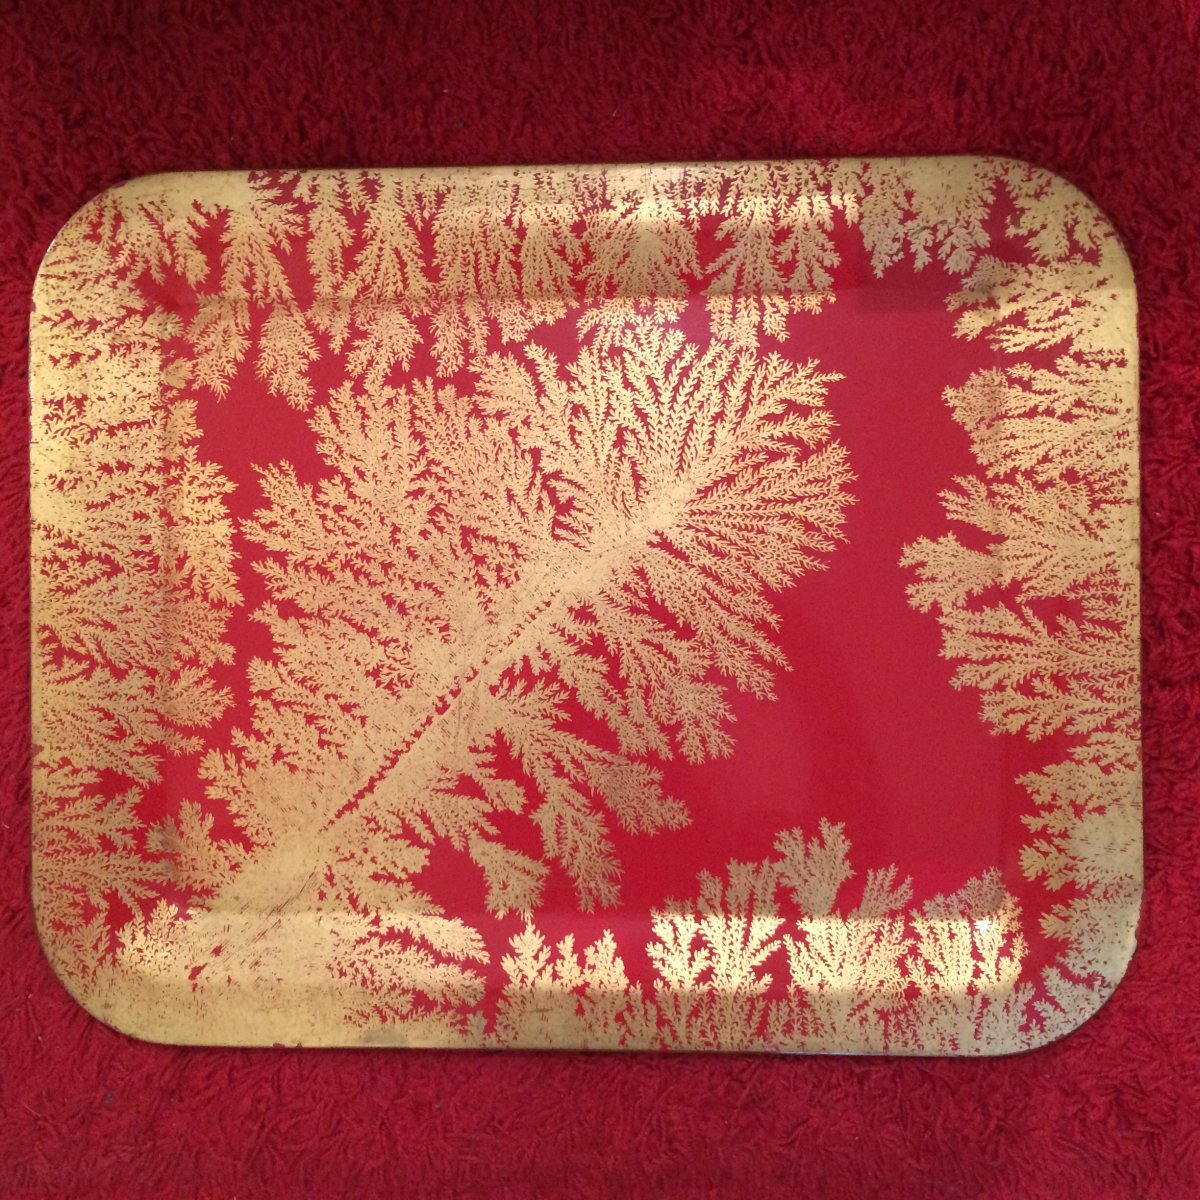 Fornasetti Piero - Metal Tray - Red And Gold Fern Leaf